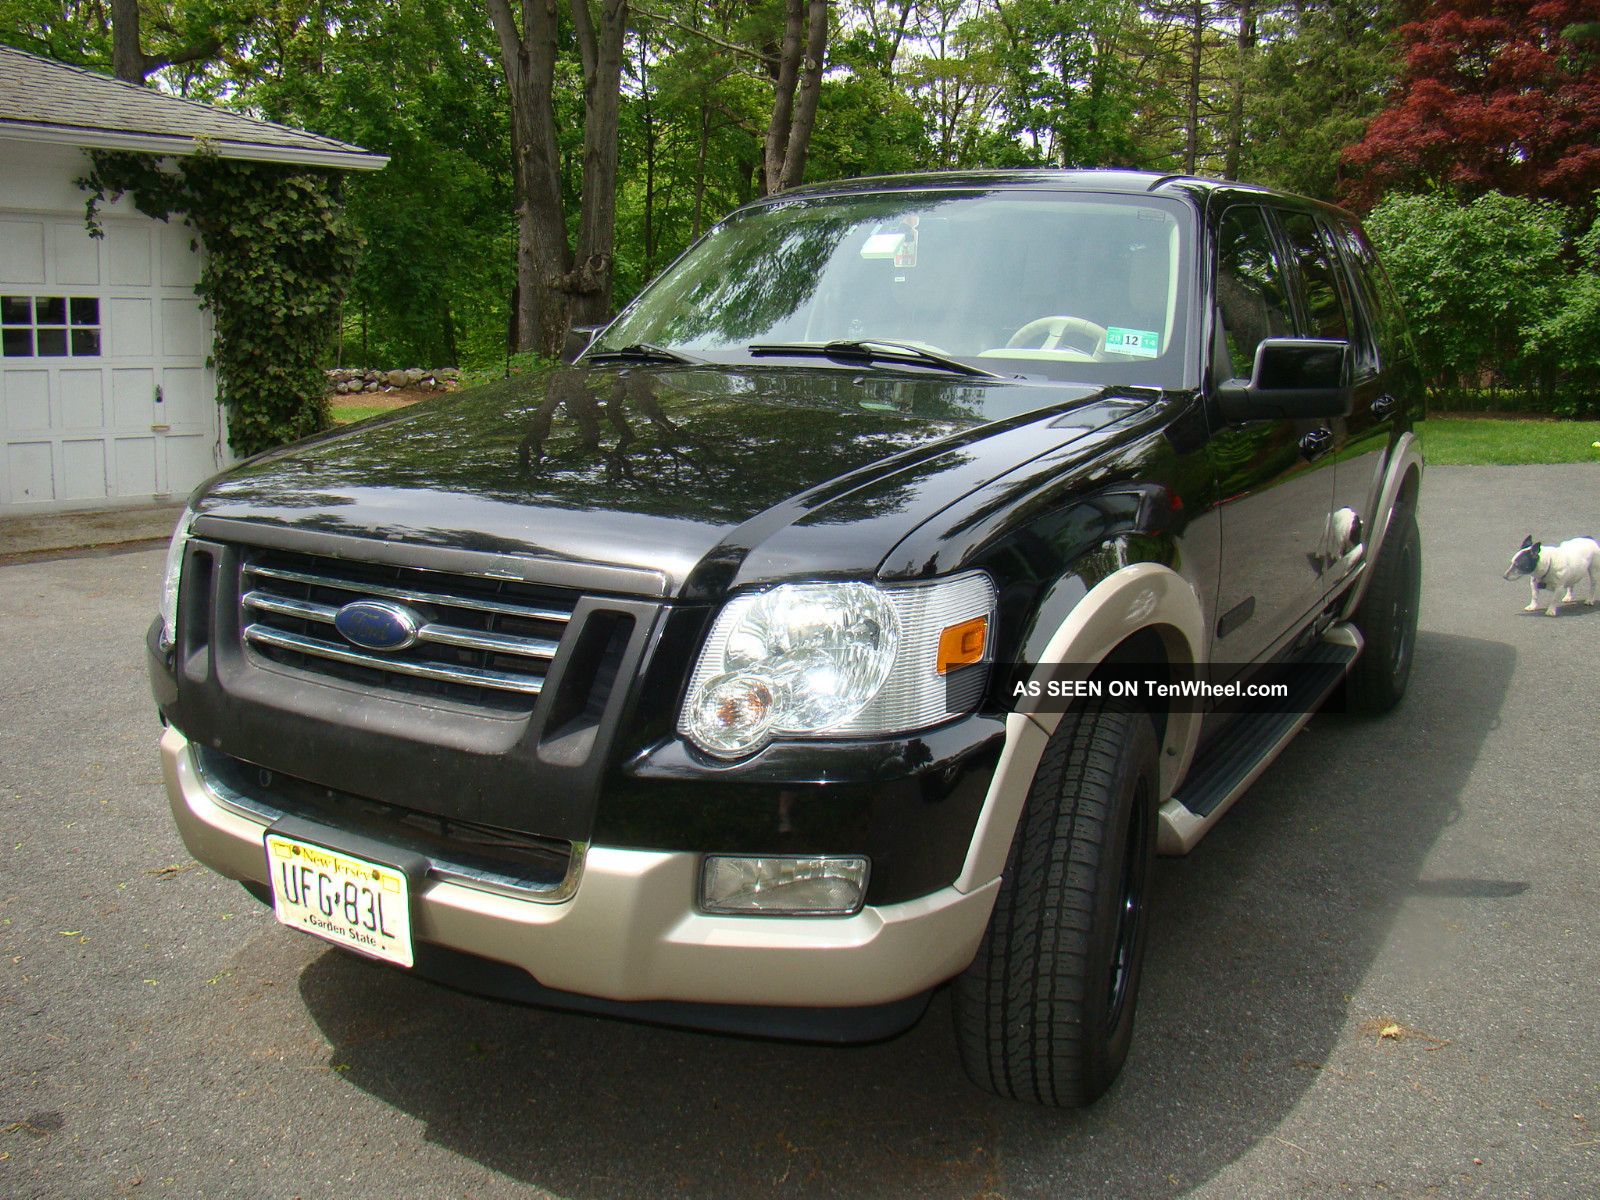 2000 Ford explorer eddie bauer edition owners manual #1